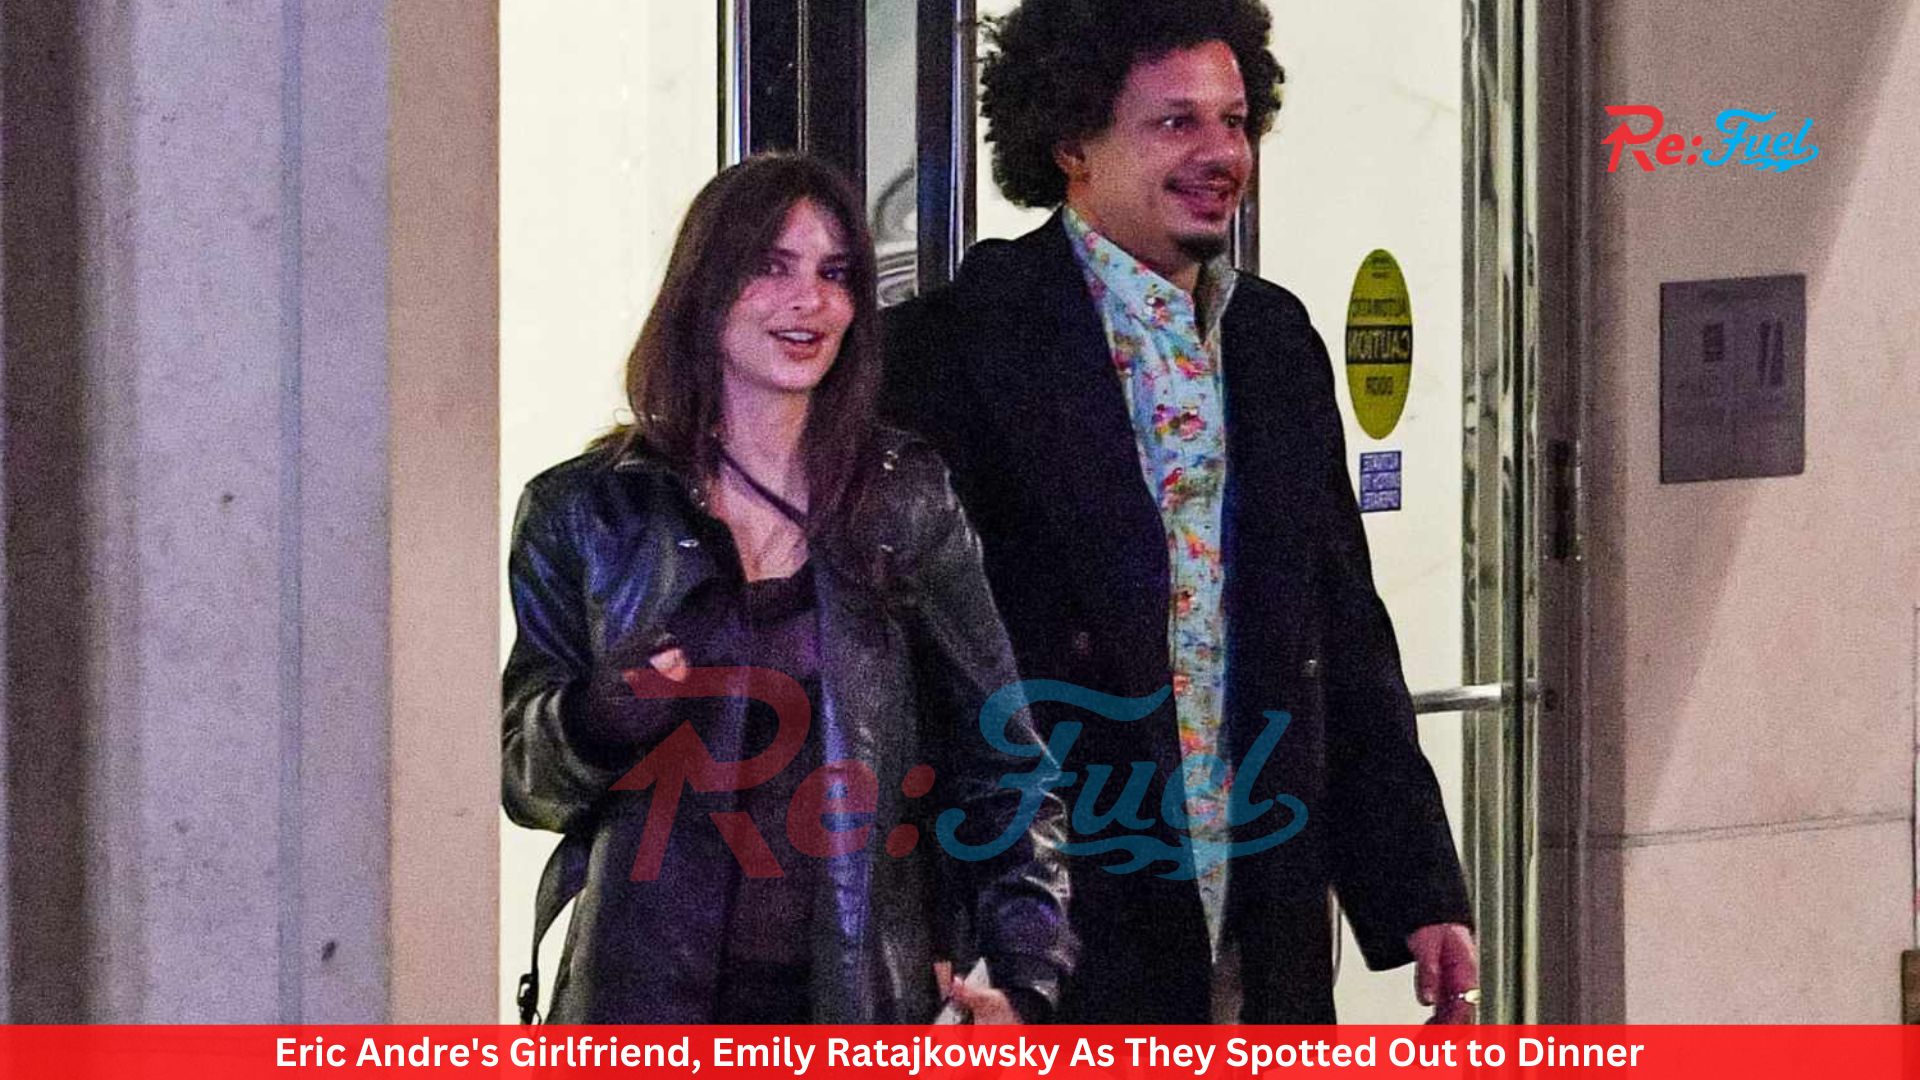 Eric Andre's Girlfriend, Emily Ratajkowsky As They Spotted Out to Dinner